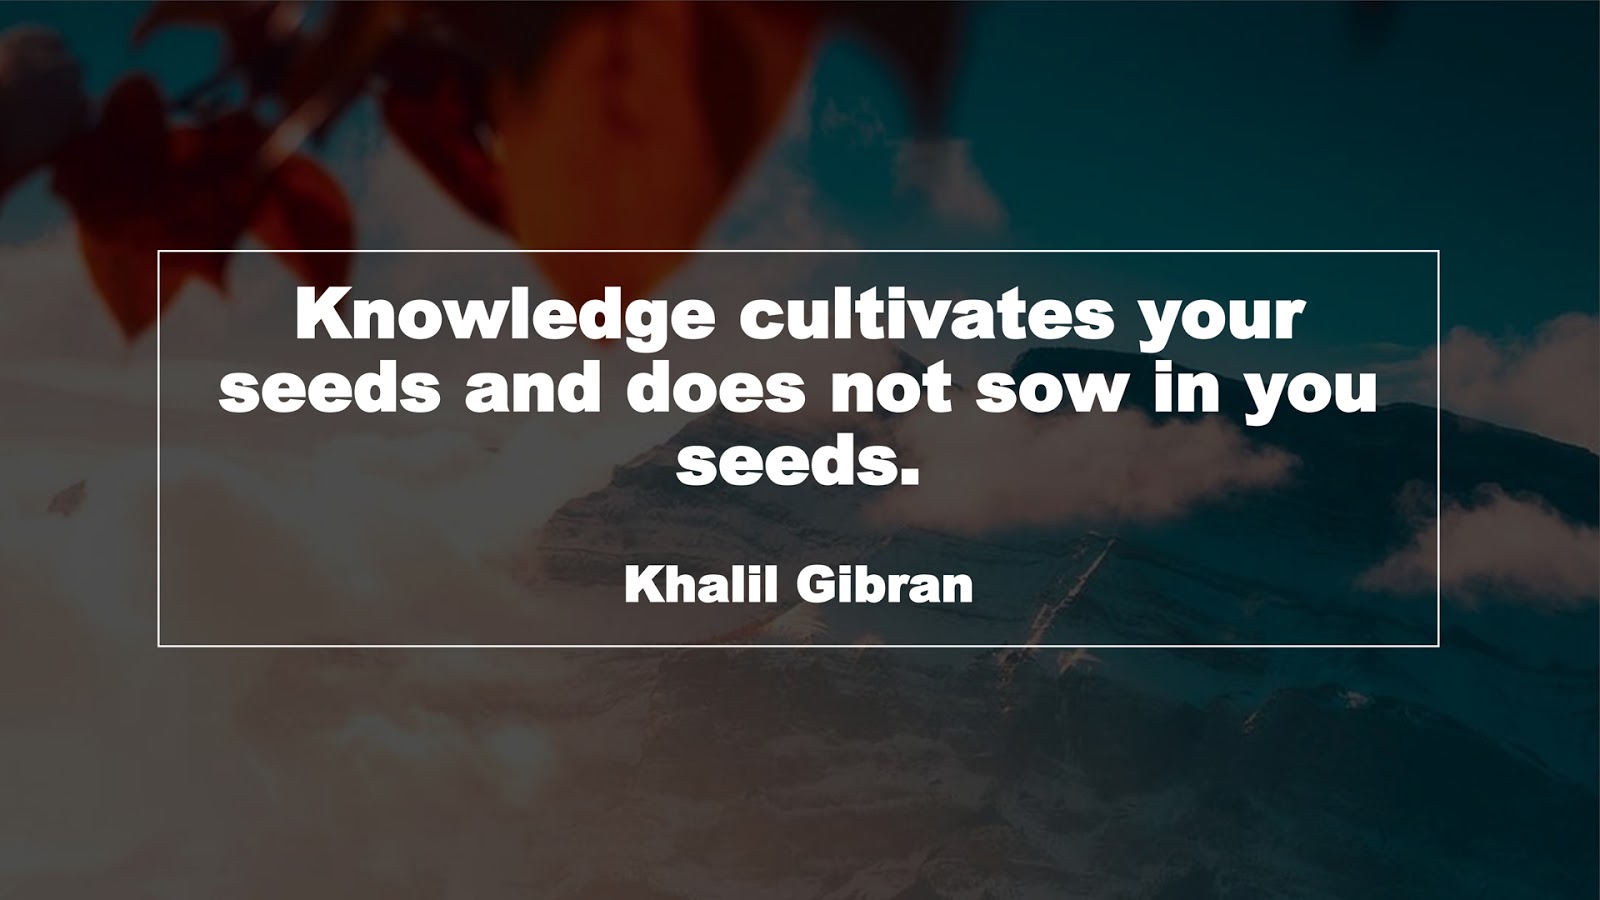 Knowledge cultivates your seeds and does not sow in you seeds. (Khalil Gibran)